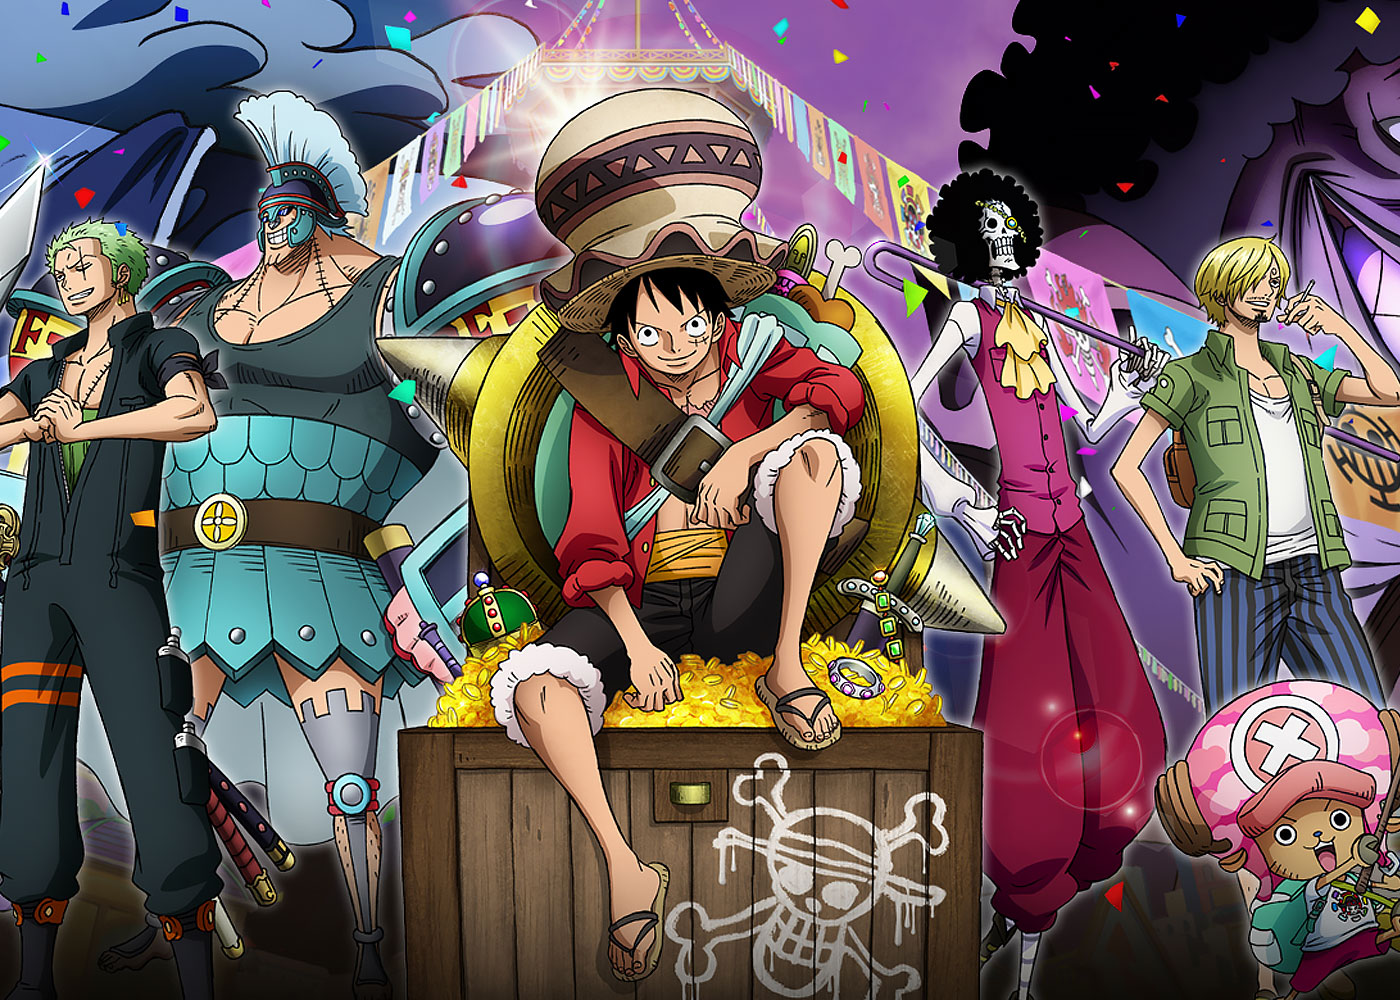 situs download anime one piece